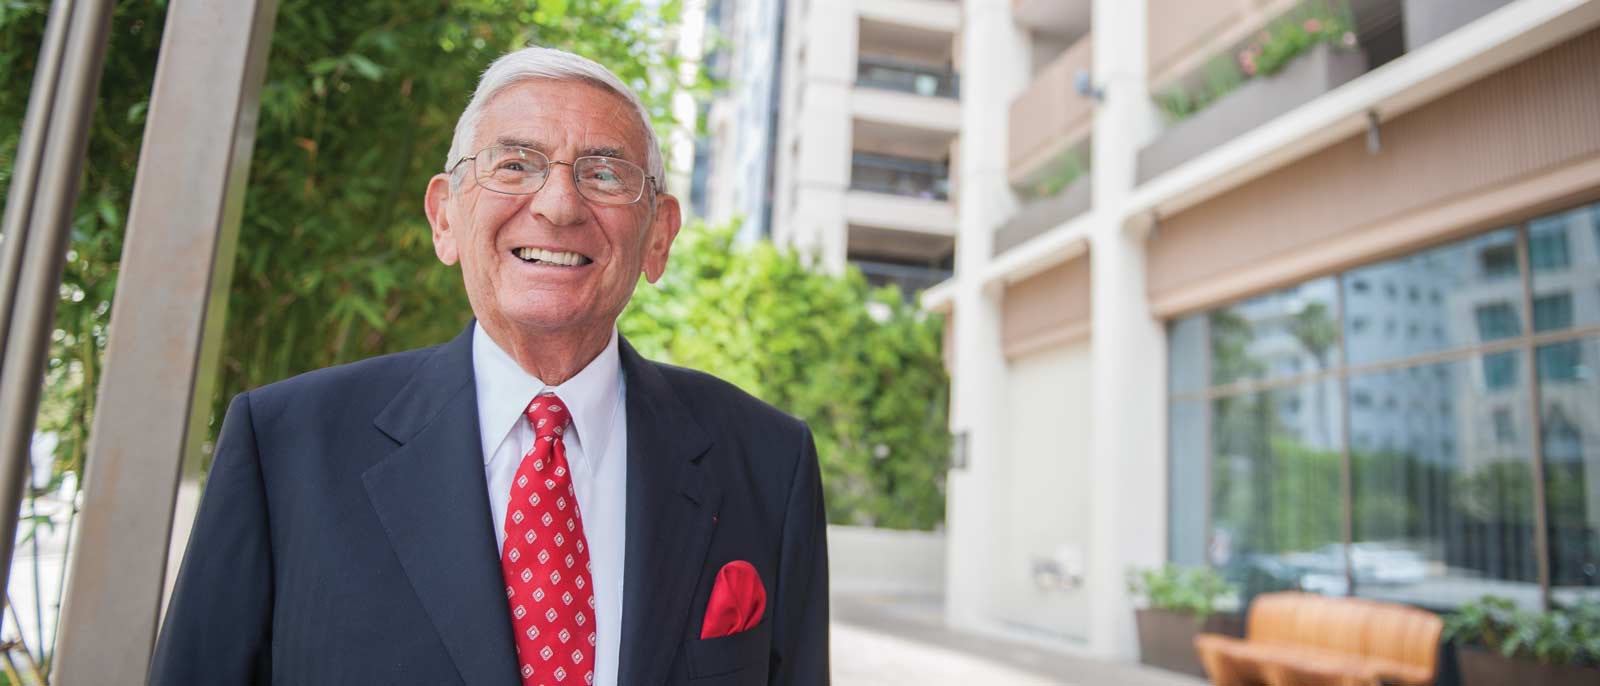 Portrait of business leader and philanthropist Eli Broad, standing outside on a sunny day.